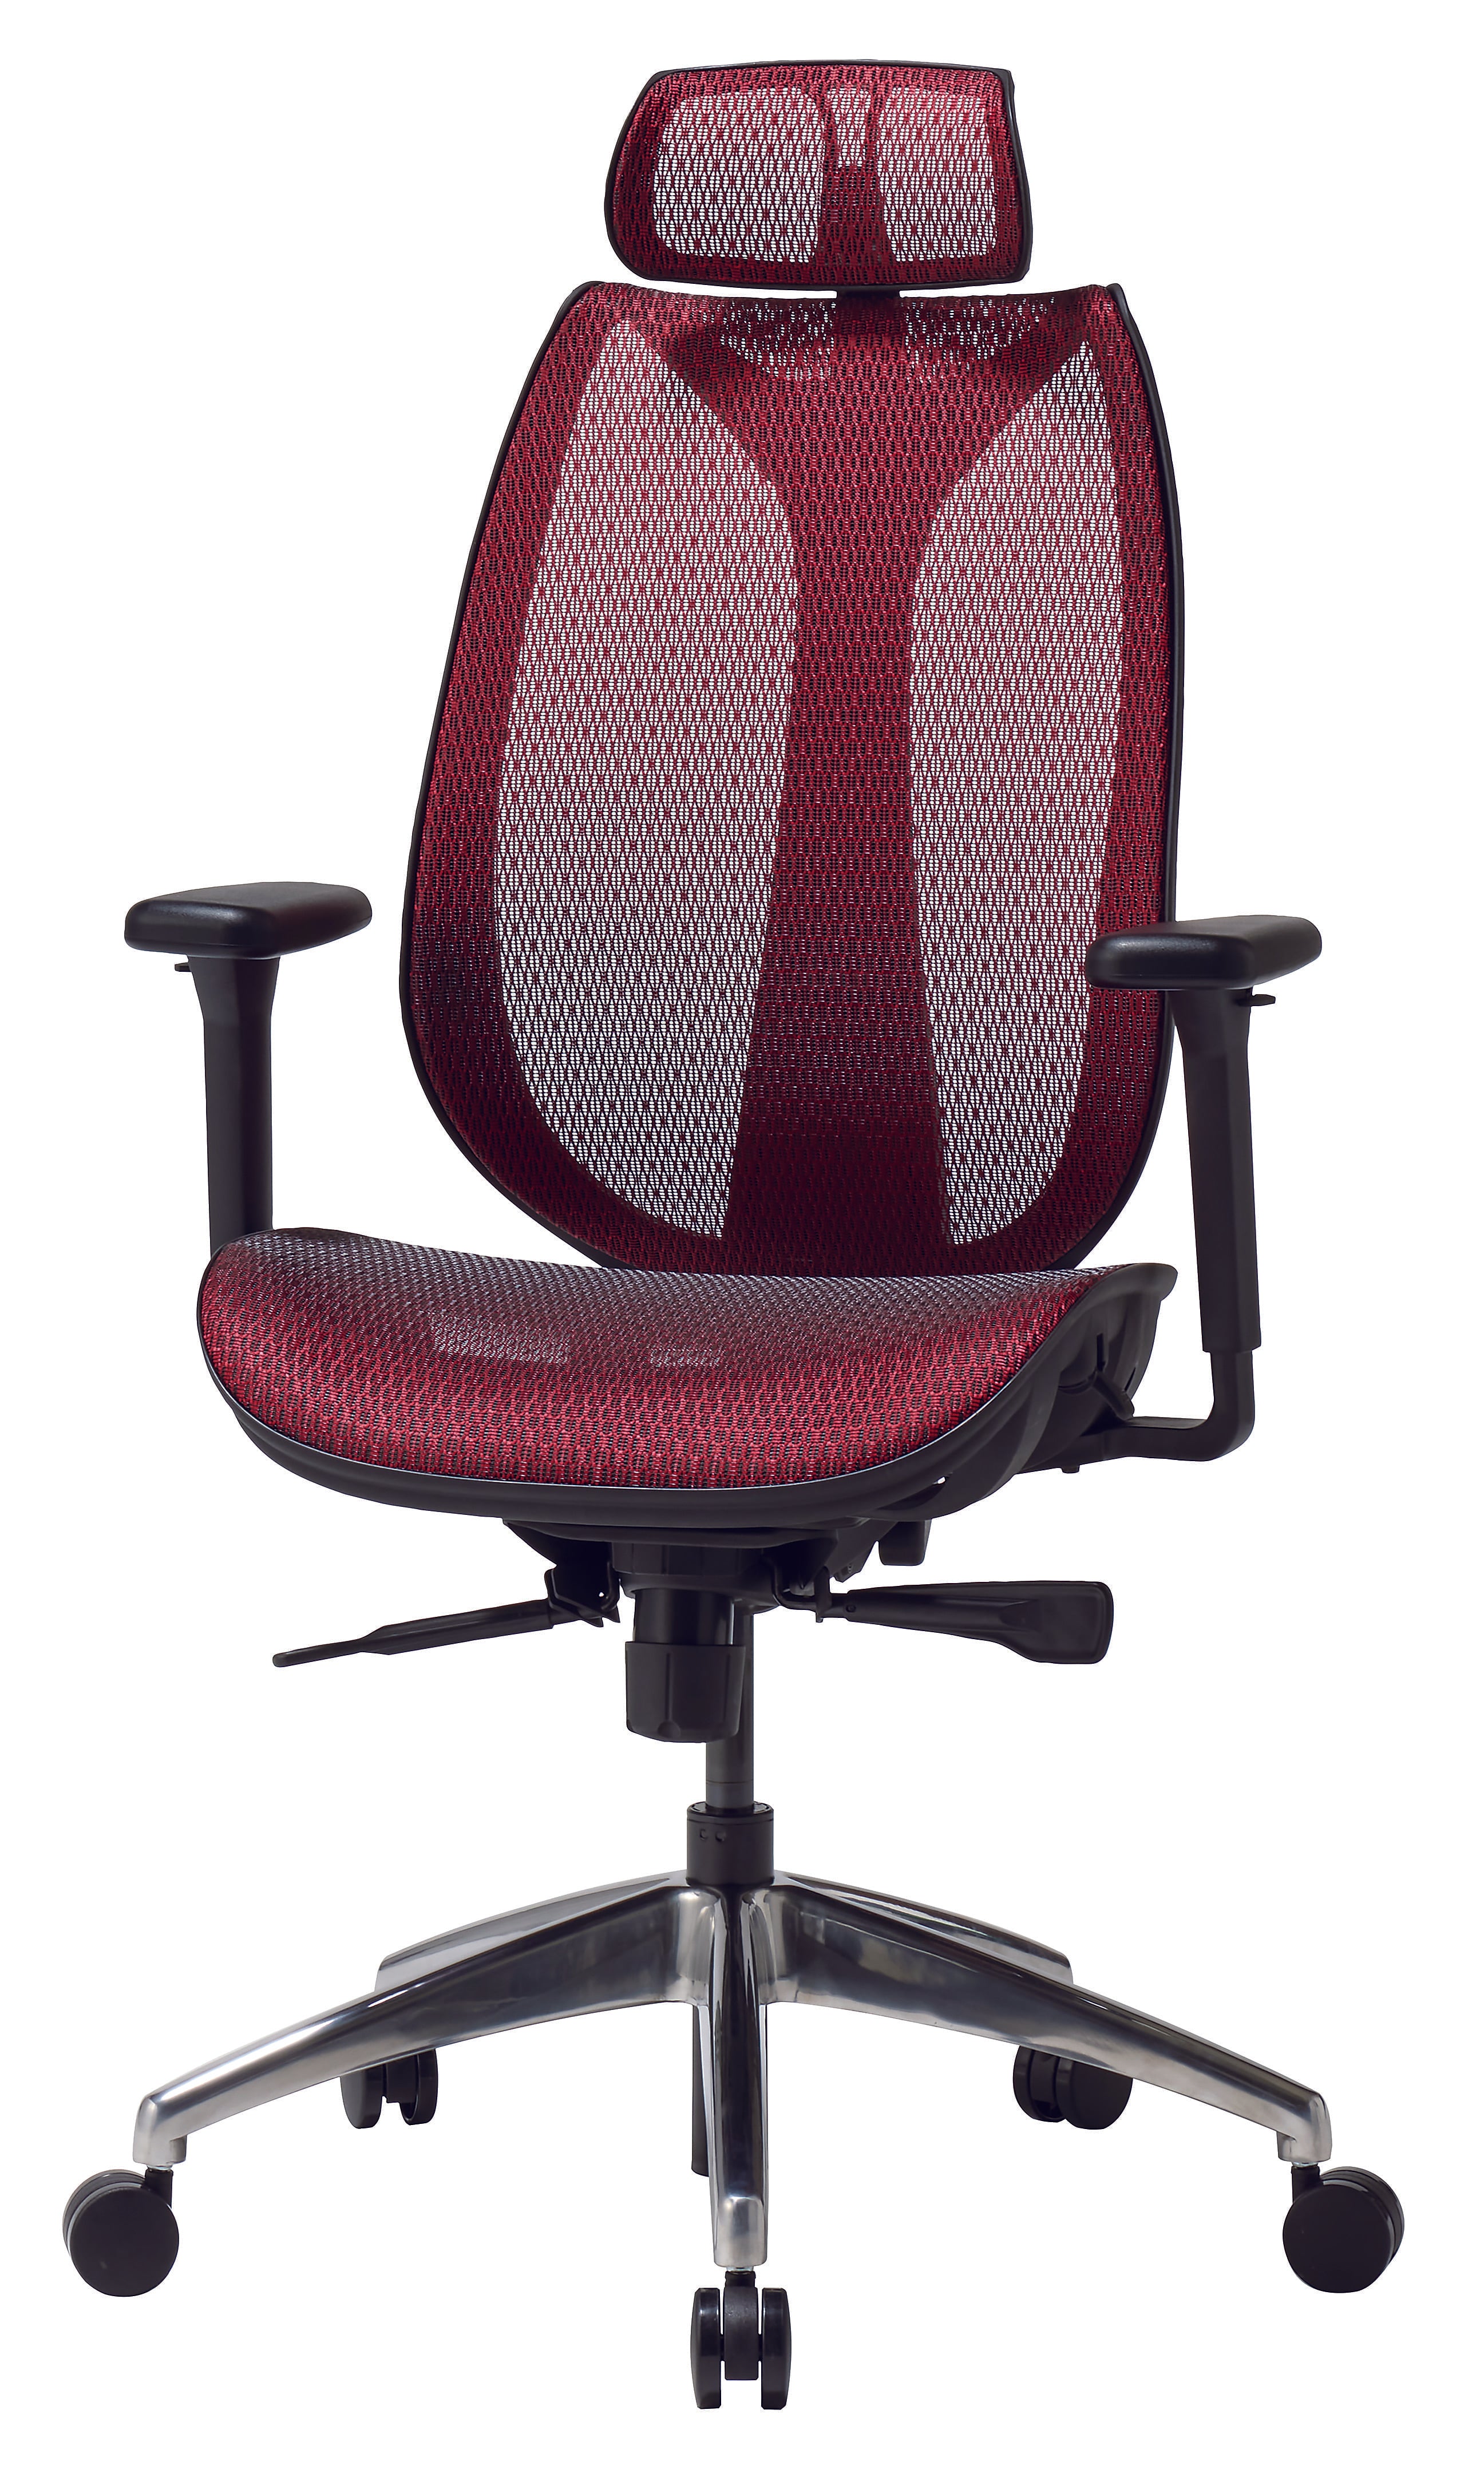 WCT Manager's chair